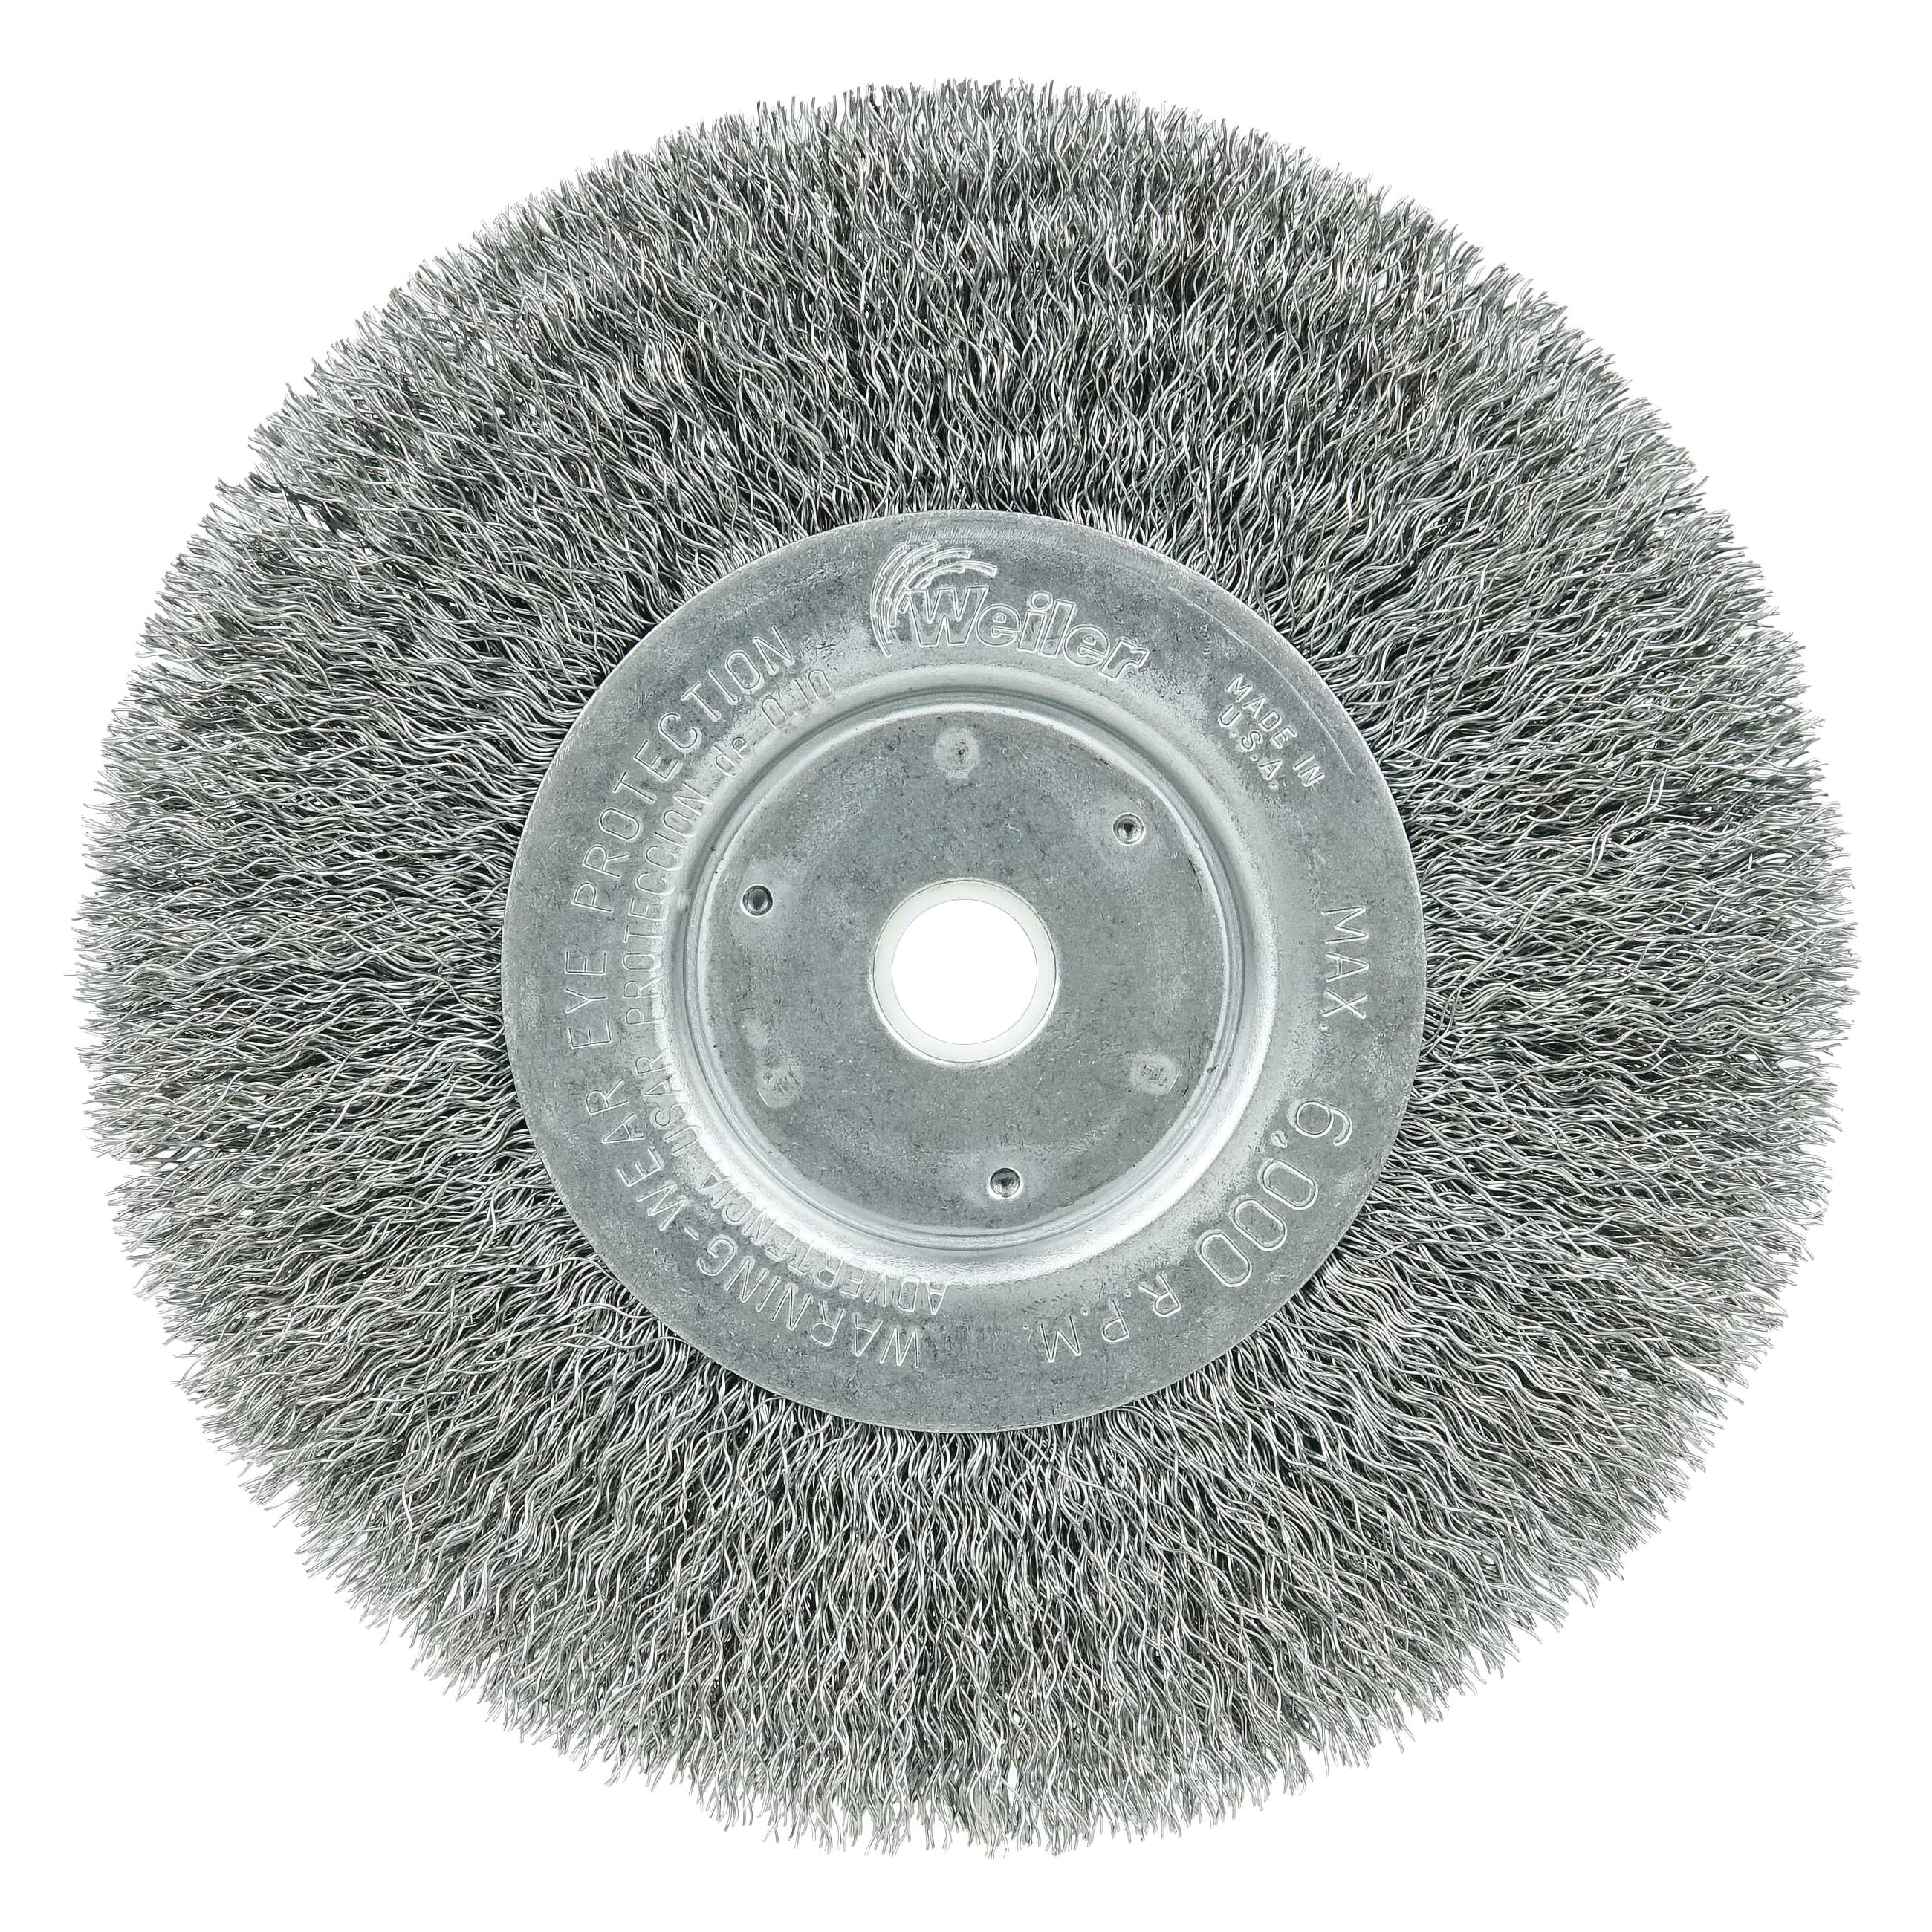 Weiler® 01055 Narrow Face Wheel Brush, 6 in Dia Brush, 3/4 in W Face, 0.0104 in Dia Crimped Filament/Wire, 1/2 to 5/8 in Arbor Hole